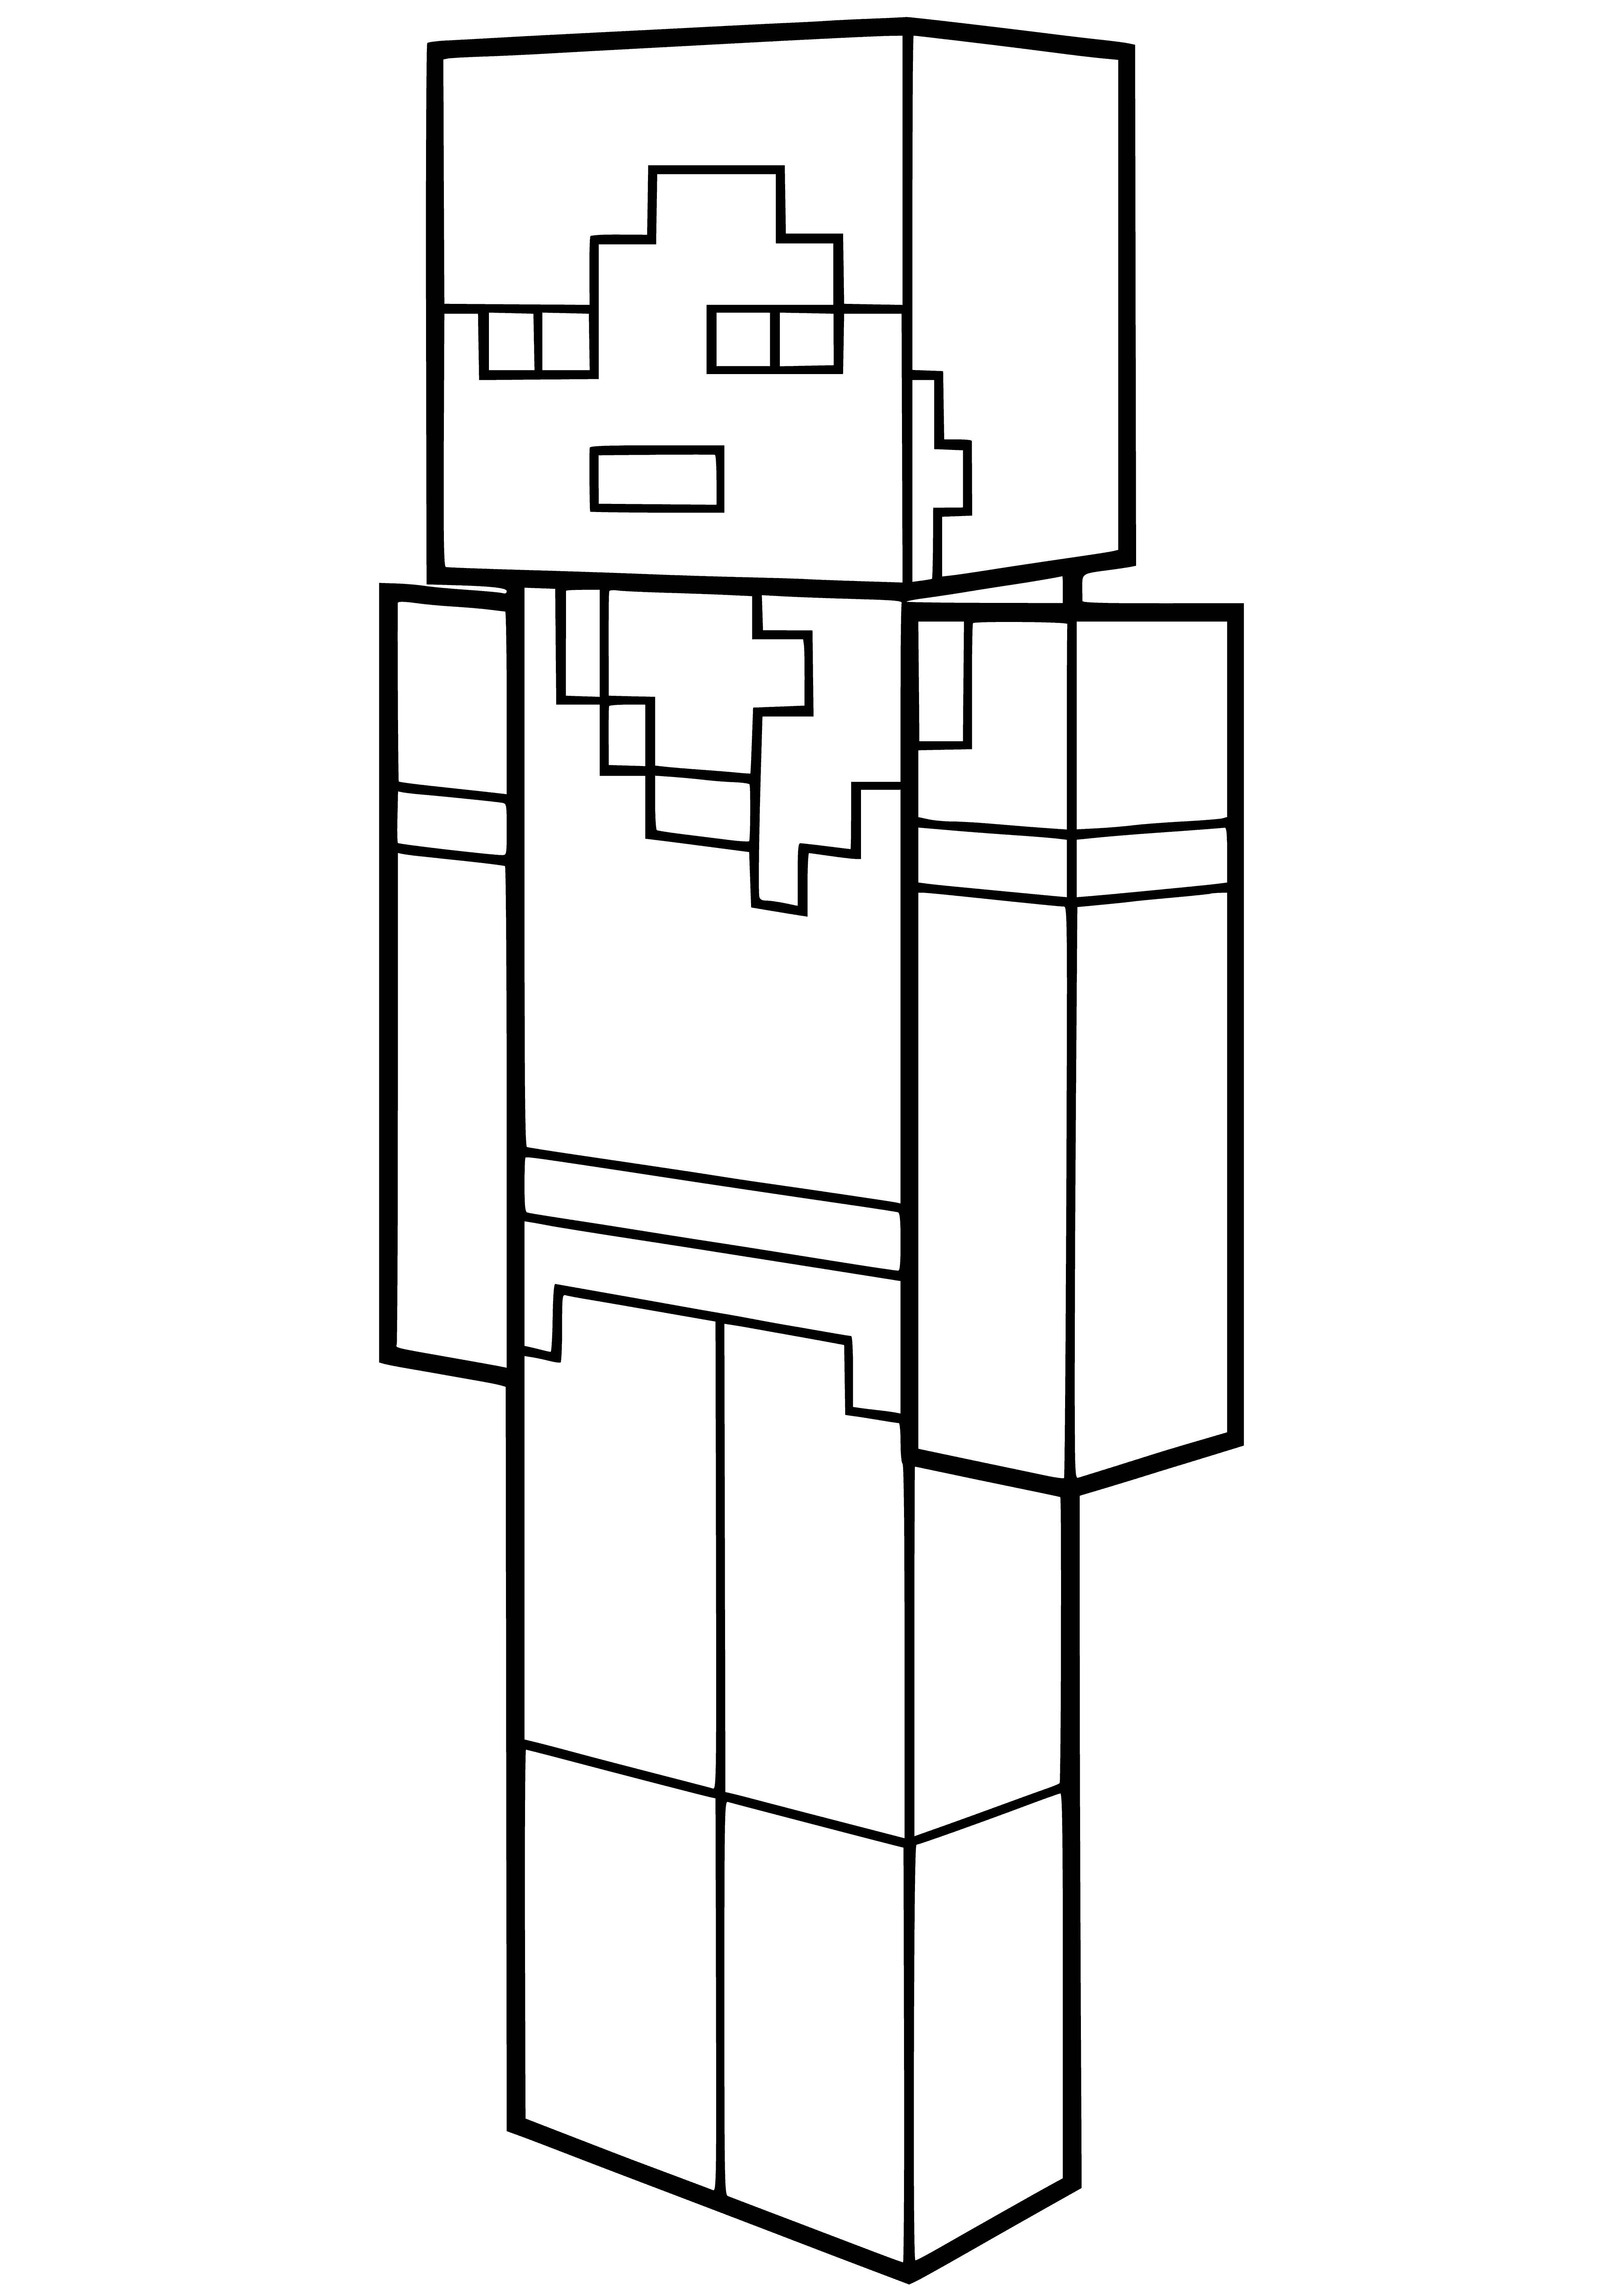 coloring page: Alex is a human character in the game Minecraft, wearing white armor and holding a sword. He has brown hair and blue eyes. #minecraft